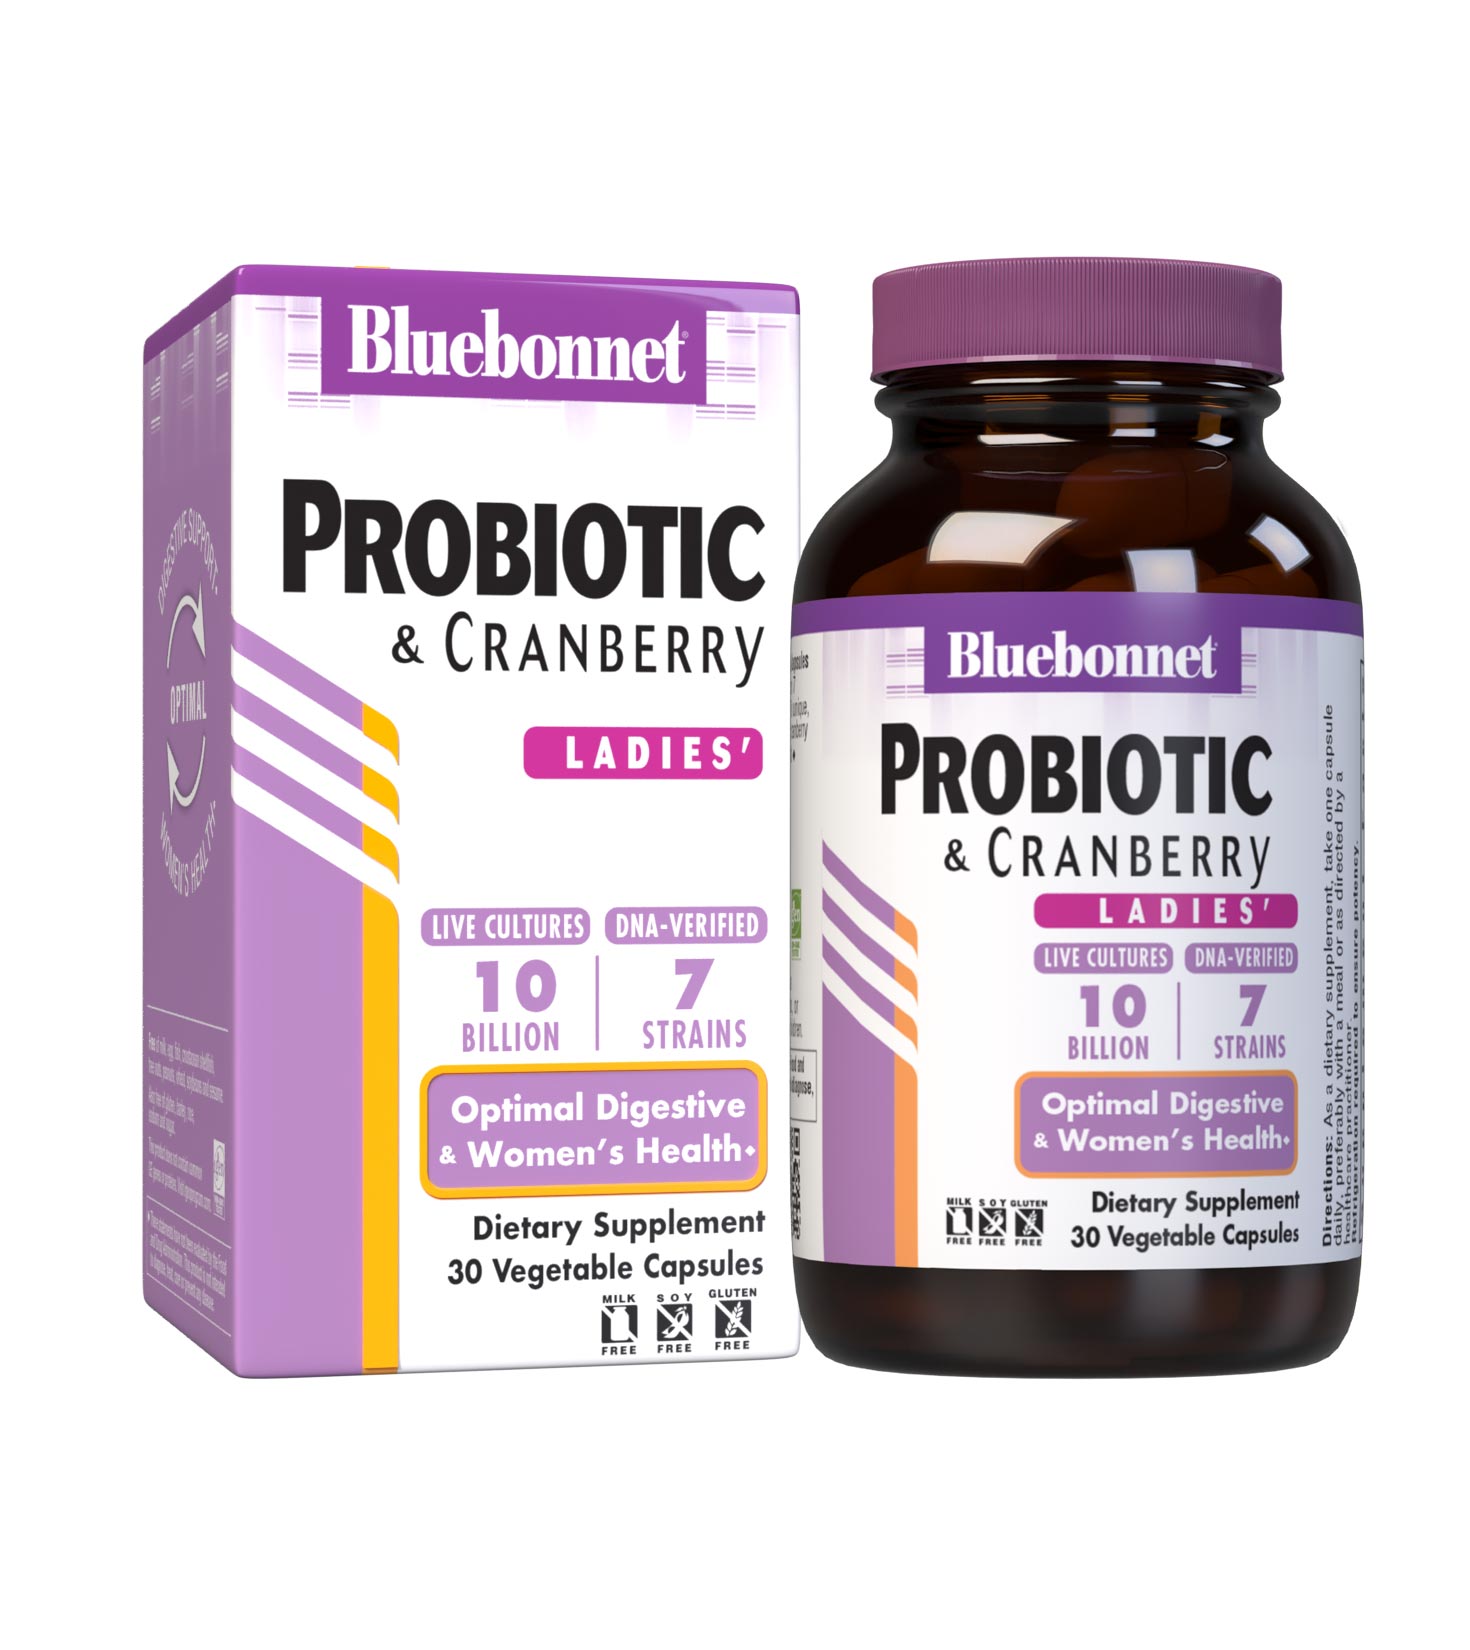 Bluebonnet’s Ladies' Probiotic & Cranberry 30 Vegetable Capsules are formulated with 10 billion viable cultures from 7 DNA-verified, scientifically supported strains. This unique, science-based probiotic formula is infused with cranberry fruit extract to further nurture urinary tract health. With bottle. #size_30 count